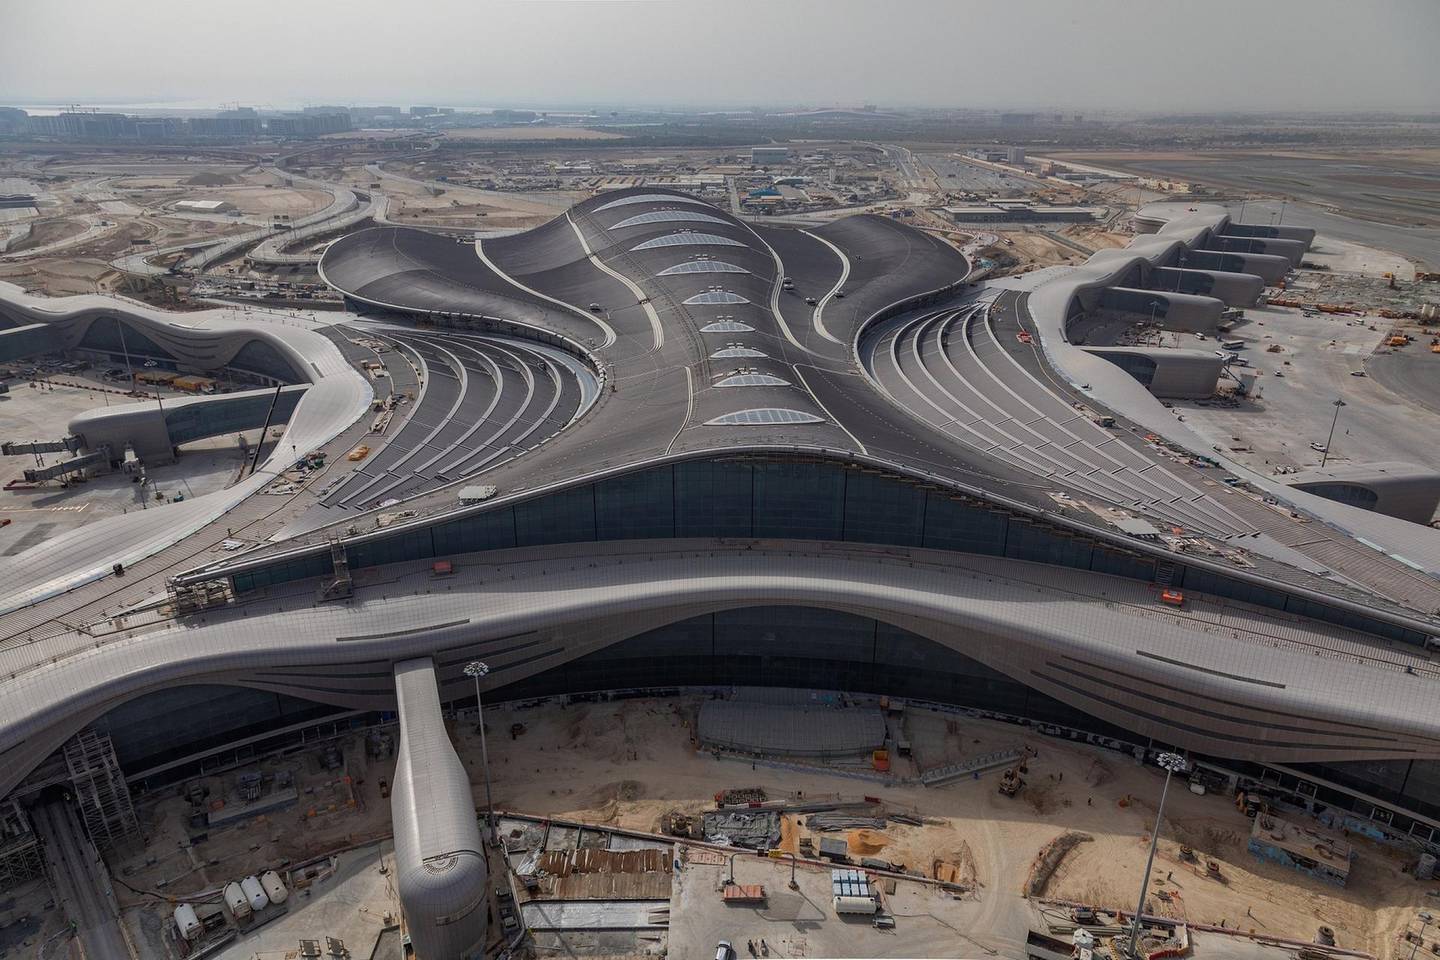 The Midfield Terminal could provide an exquisite riposte to Singapore's Changi when it opens soon, with its vast roof span, huge floor plan and airy feel. Abu Dhabi Airports